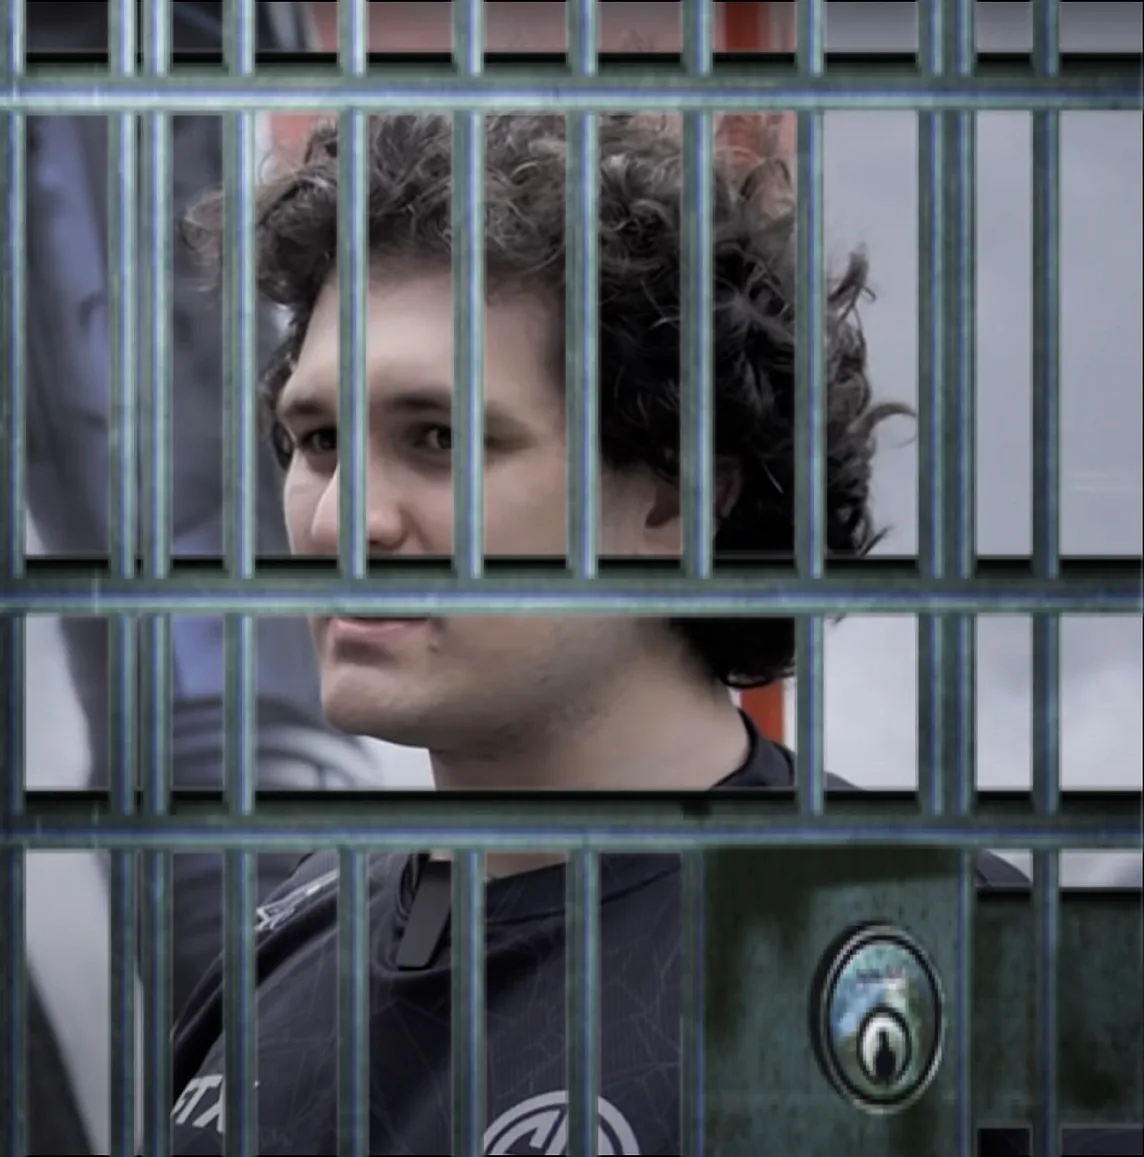 IMAGE: An image of Sam Bankman-Fried with a set of prison bars pasted over it